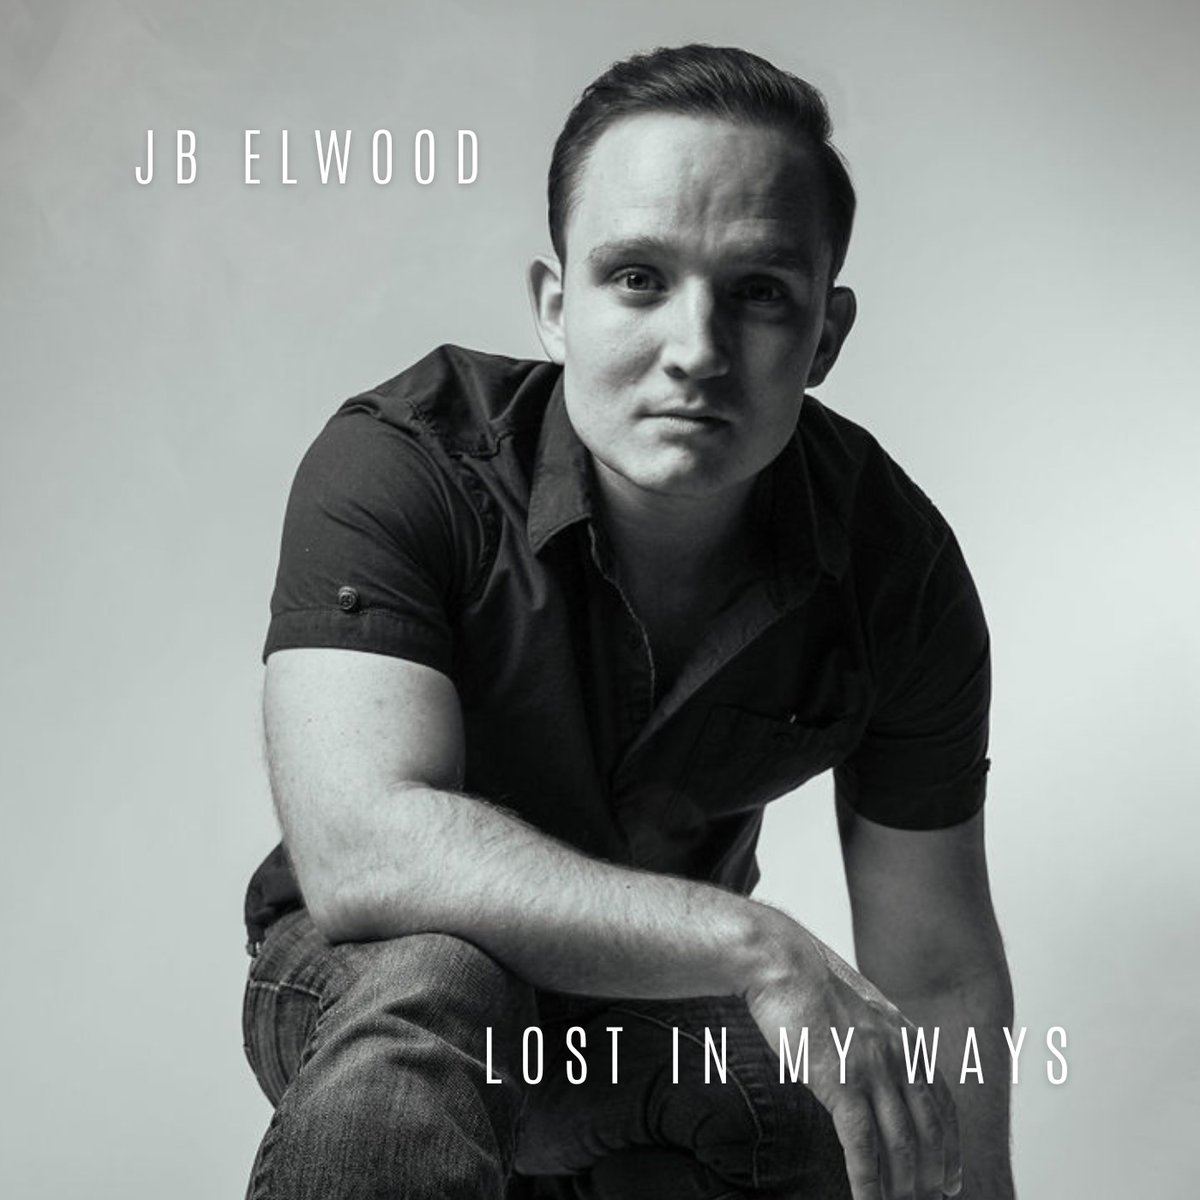 Listen to the single 'Lost In My Ways' and get acquainted with the work of the promising @jbelwoodmusic #indiedockmusicblog #poprock indiedockmusicblog.co.uk/?p=23538